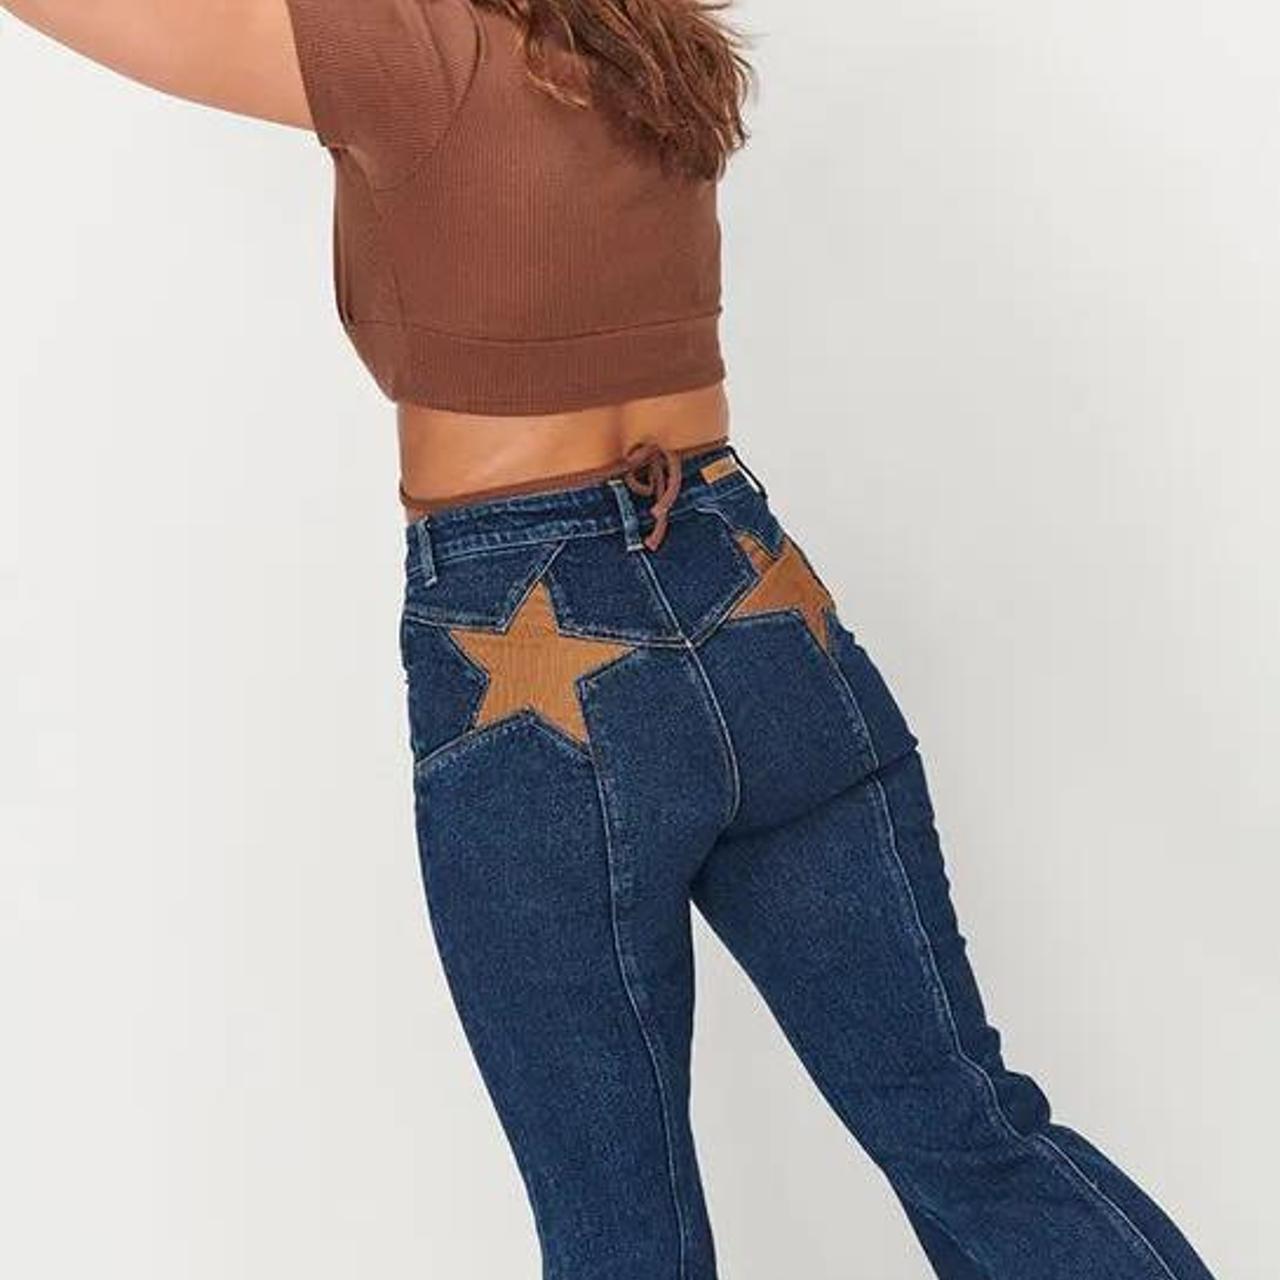 STAR JEANS Navy blue flare star jeans from the... - Depop